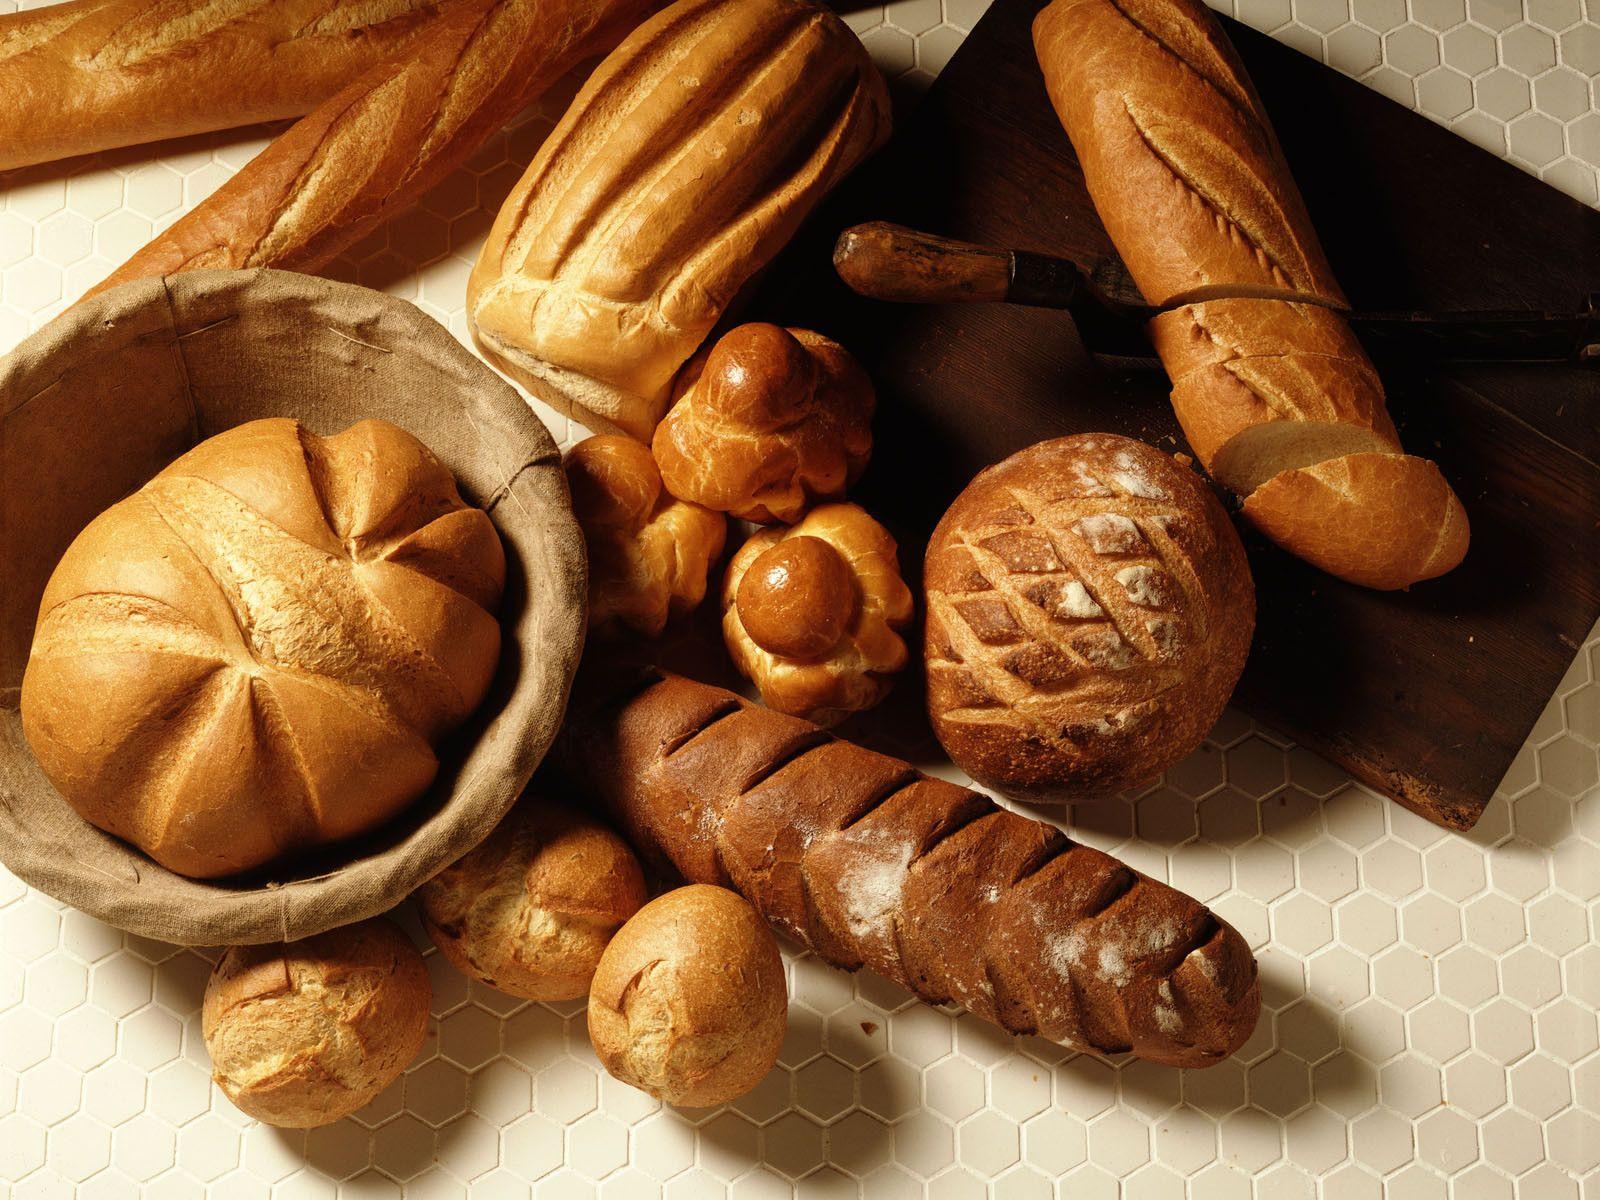 Bread Wallpaper, Awesome Bread Picture and Wallpaper 31+